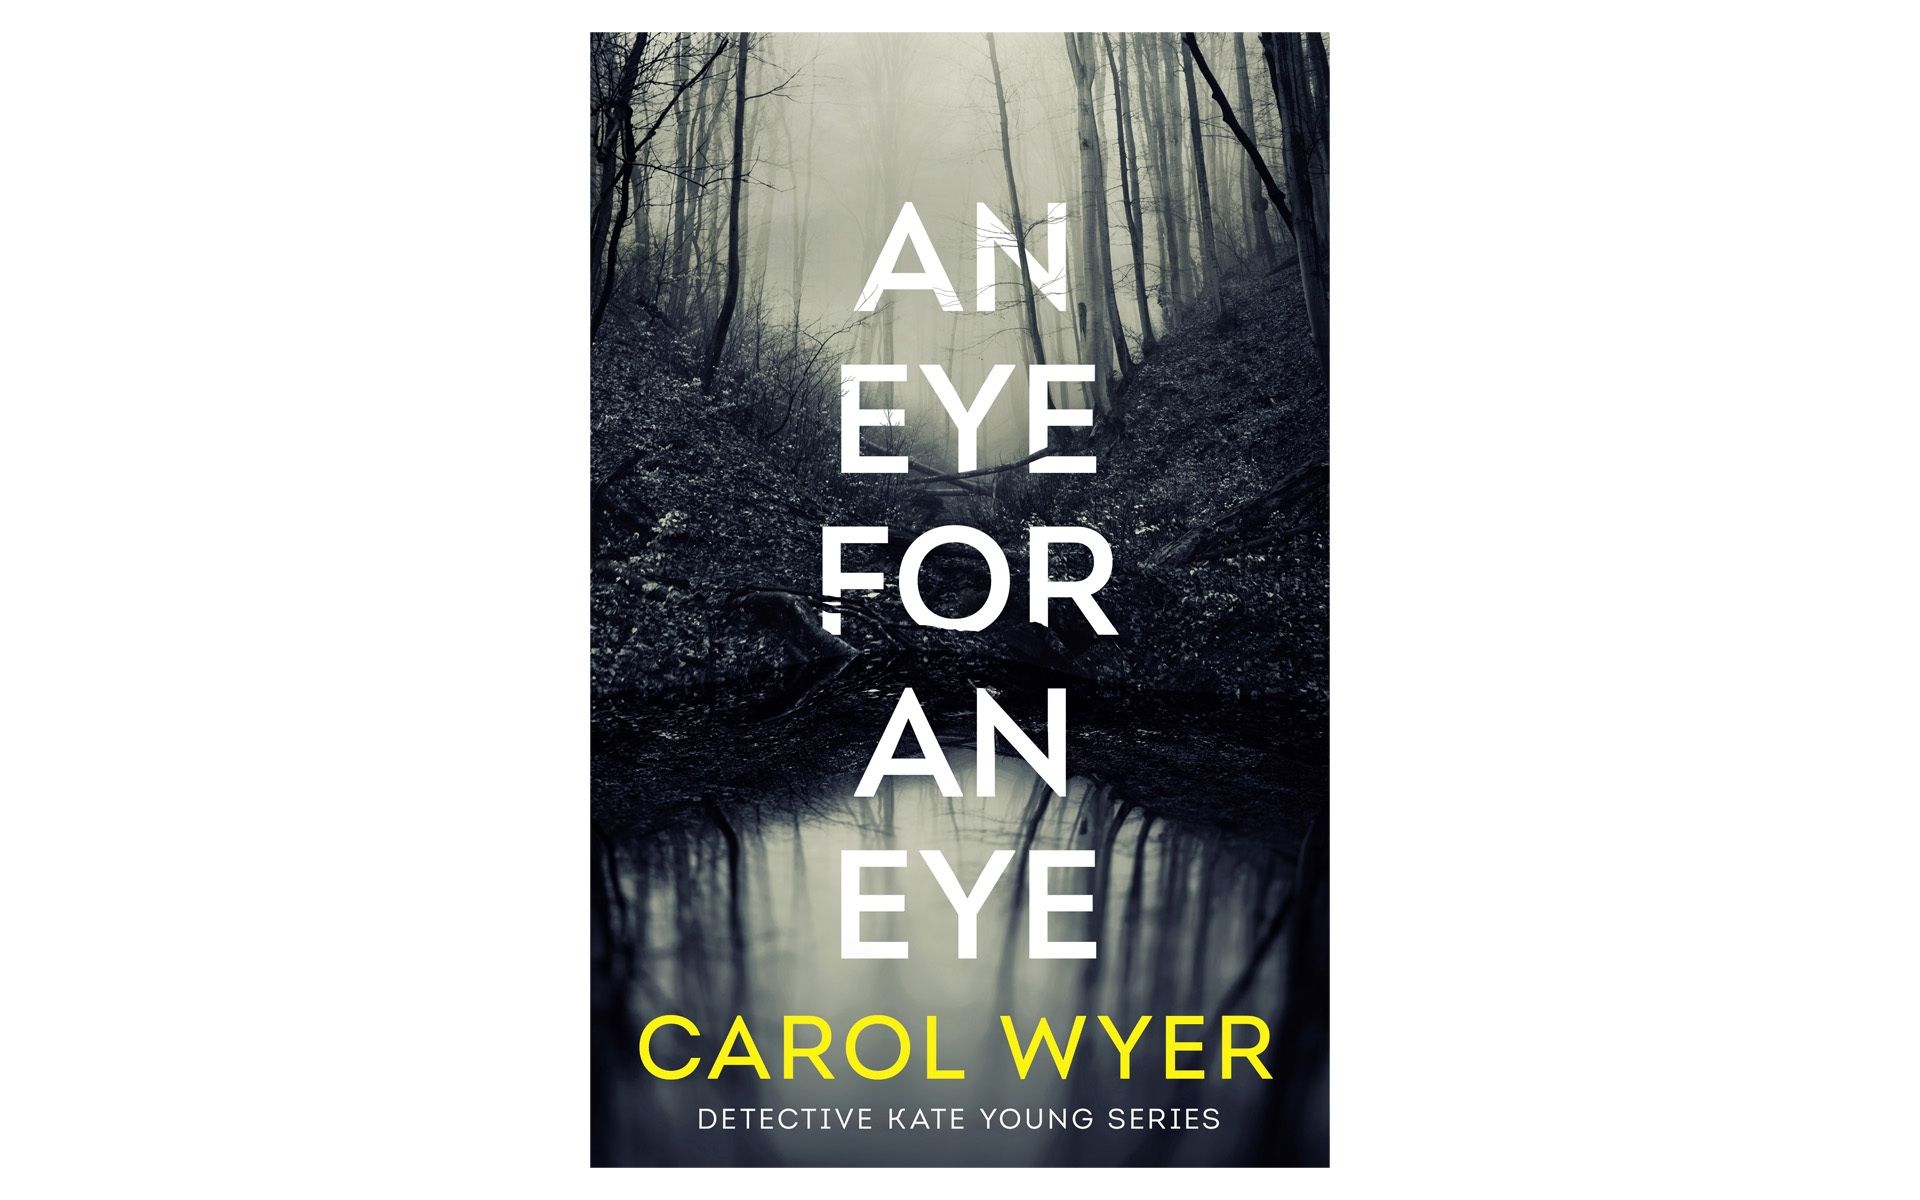 Cover art for the book "An eye for an eye Amazon"